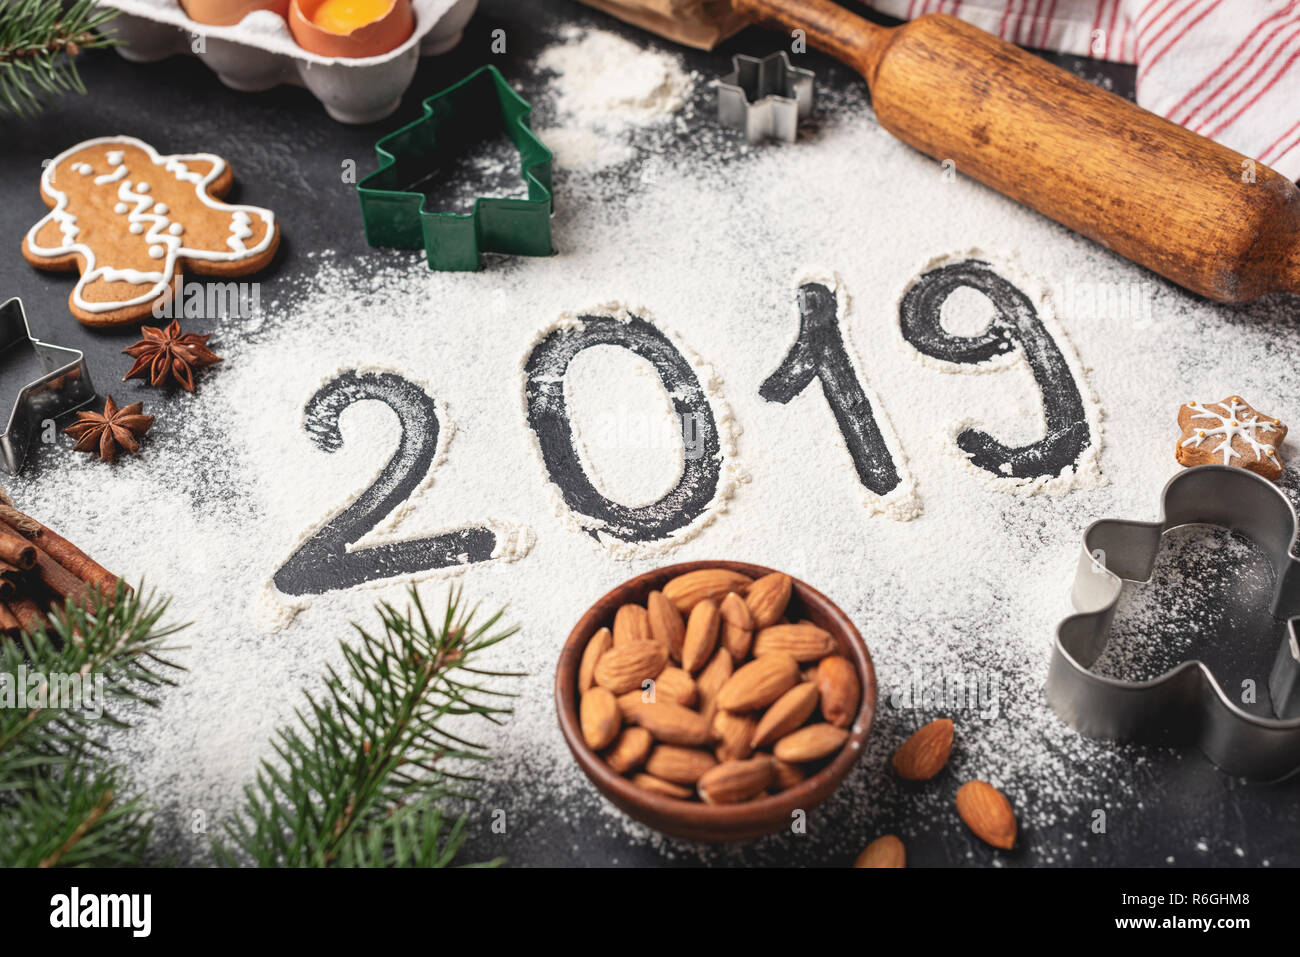 New Year 2019 written on flour. Winter holidays, Christmas concept Stock Photo